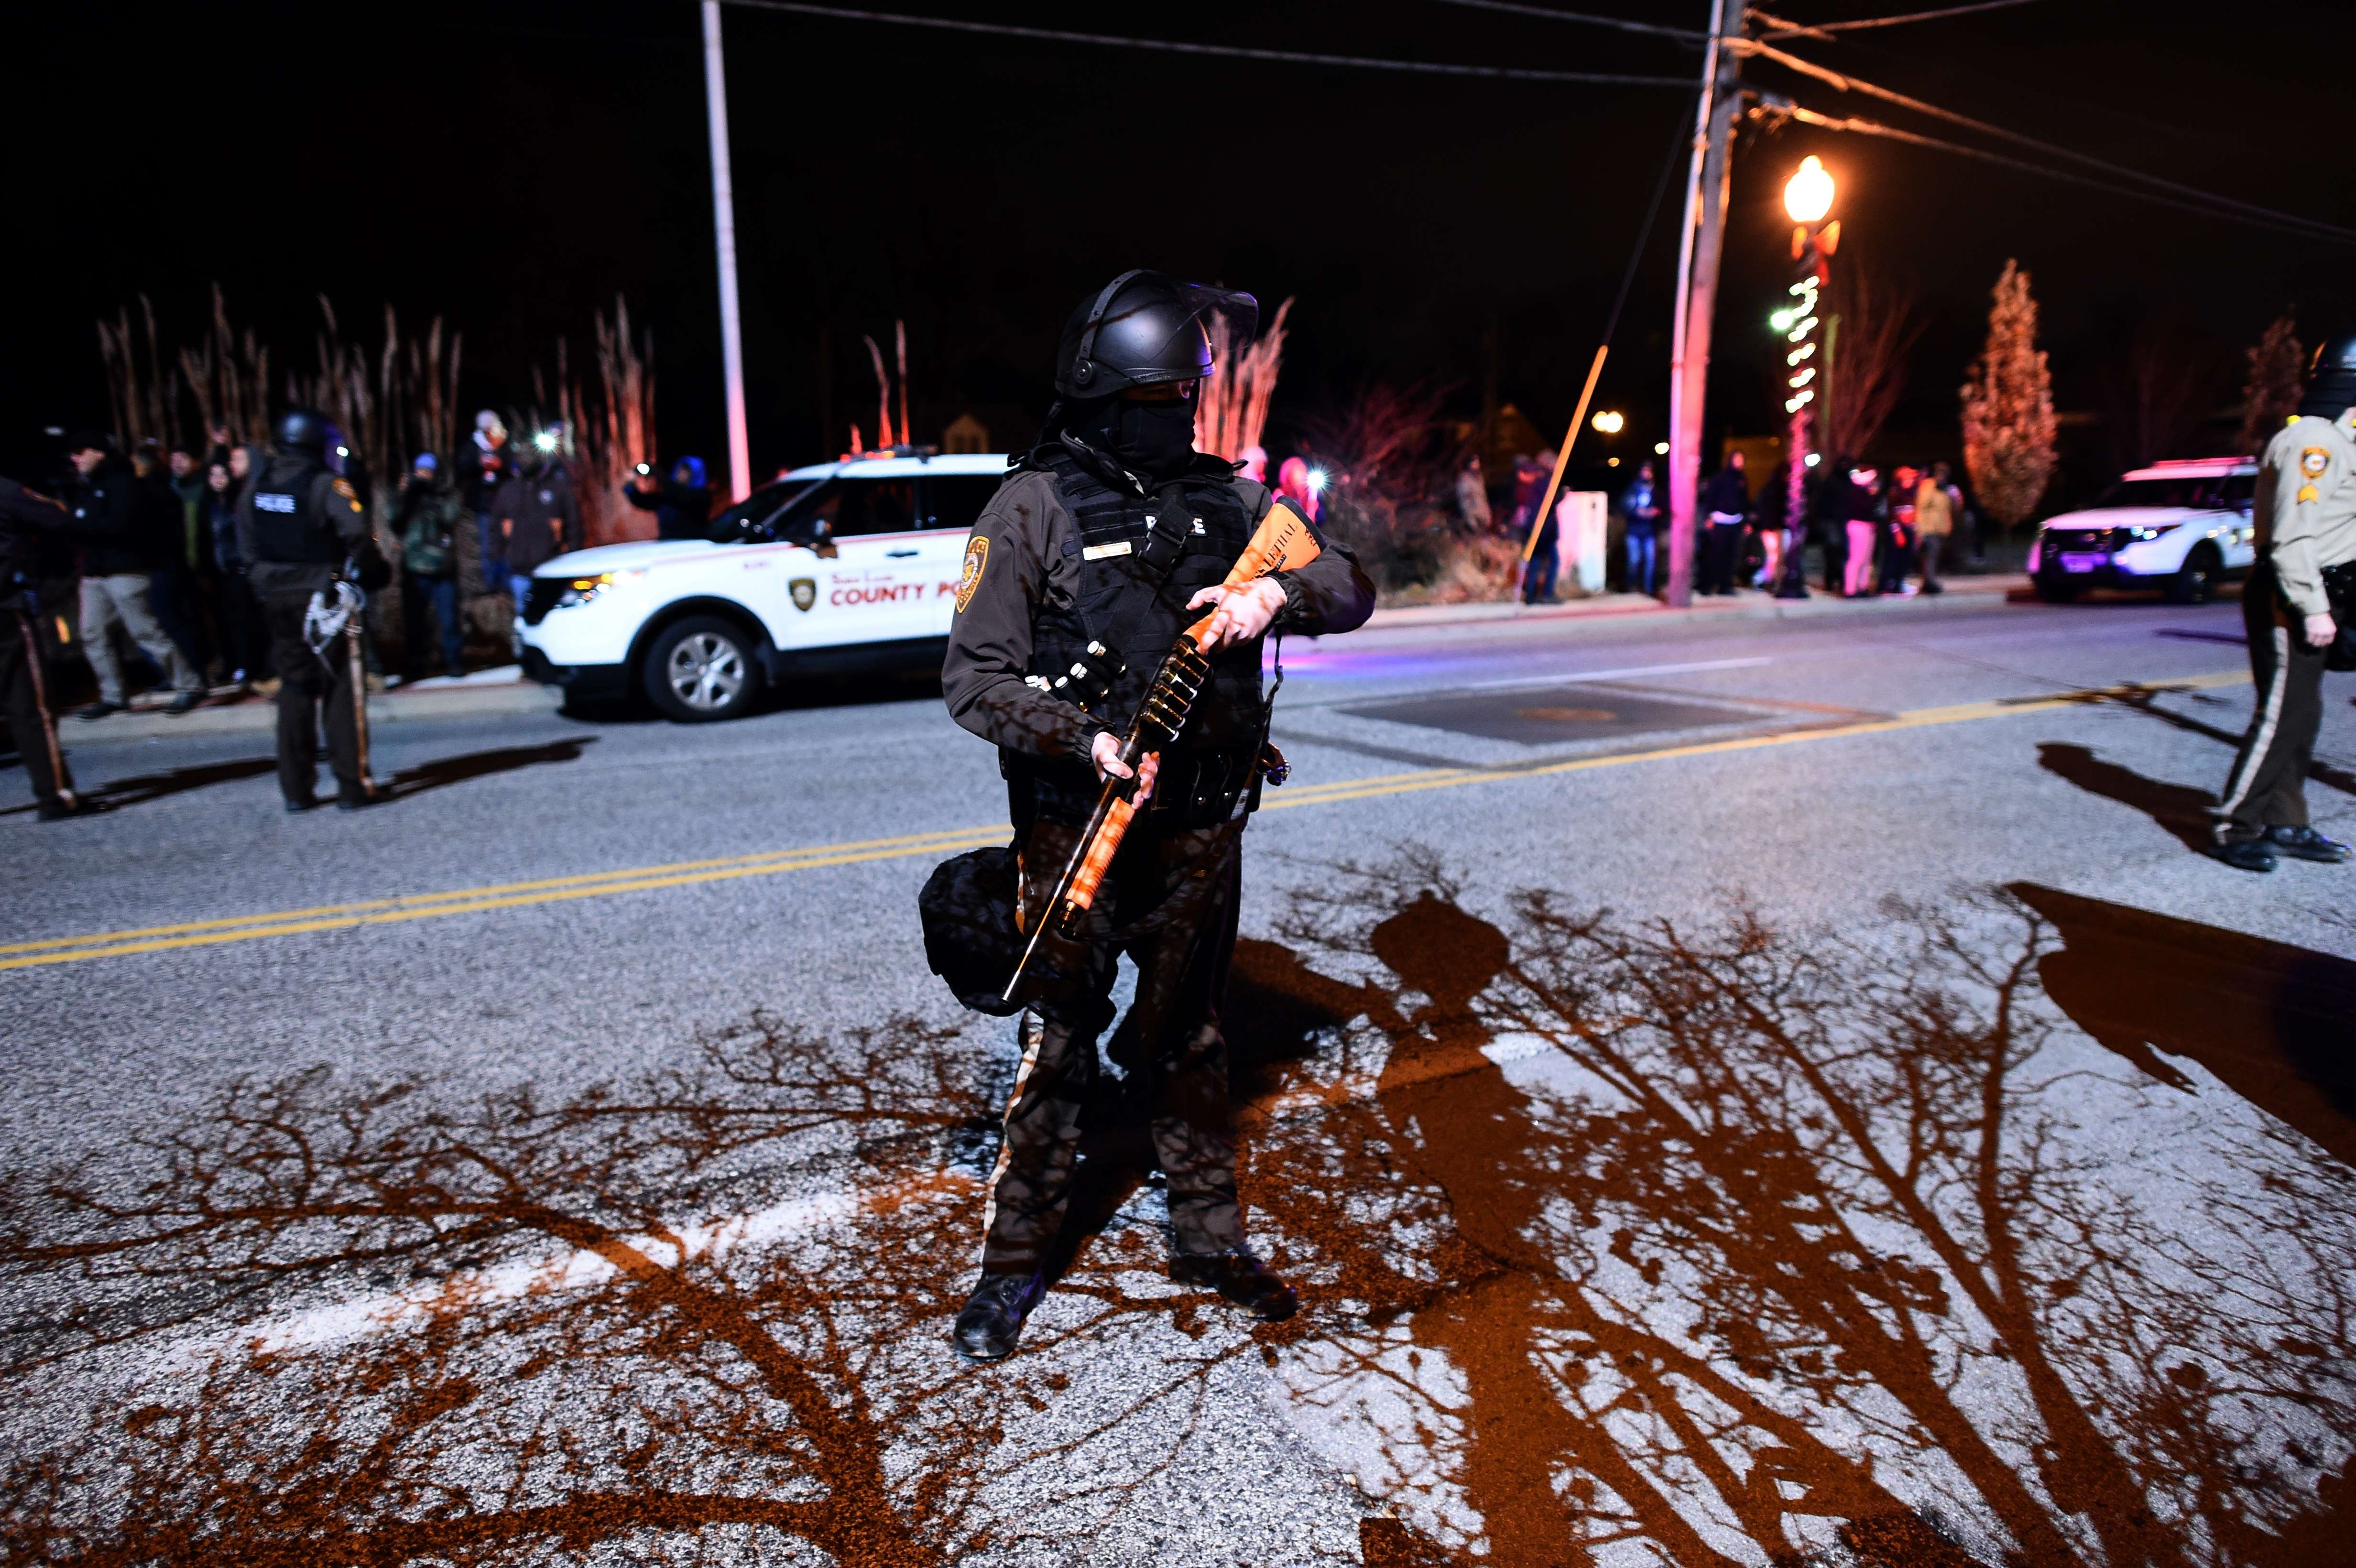 A police officer holds her gun during clashes with protesters in Ferguson, Mo. on Nov. 24, 2014.